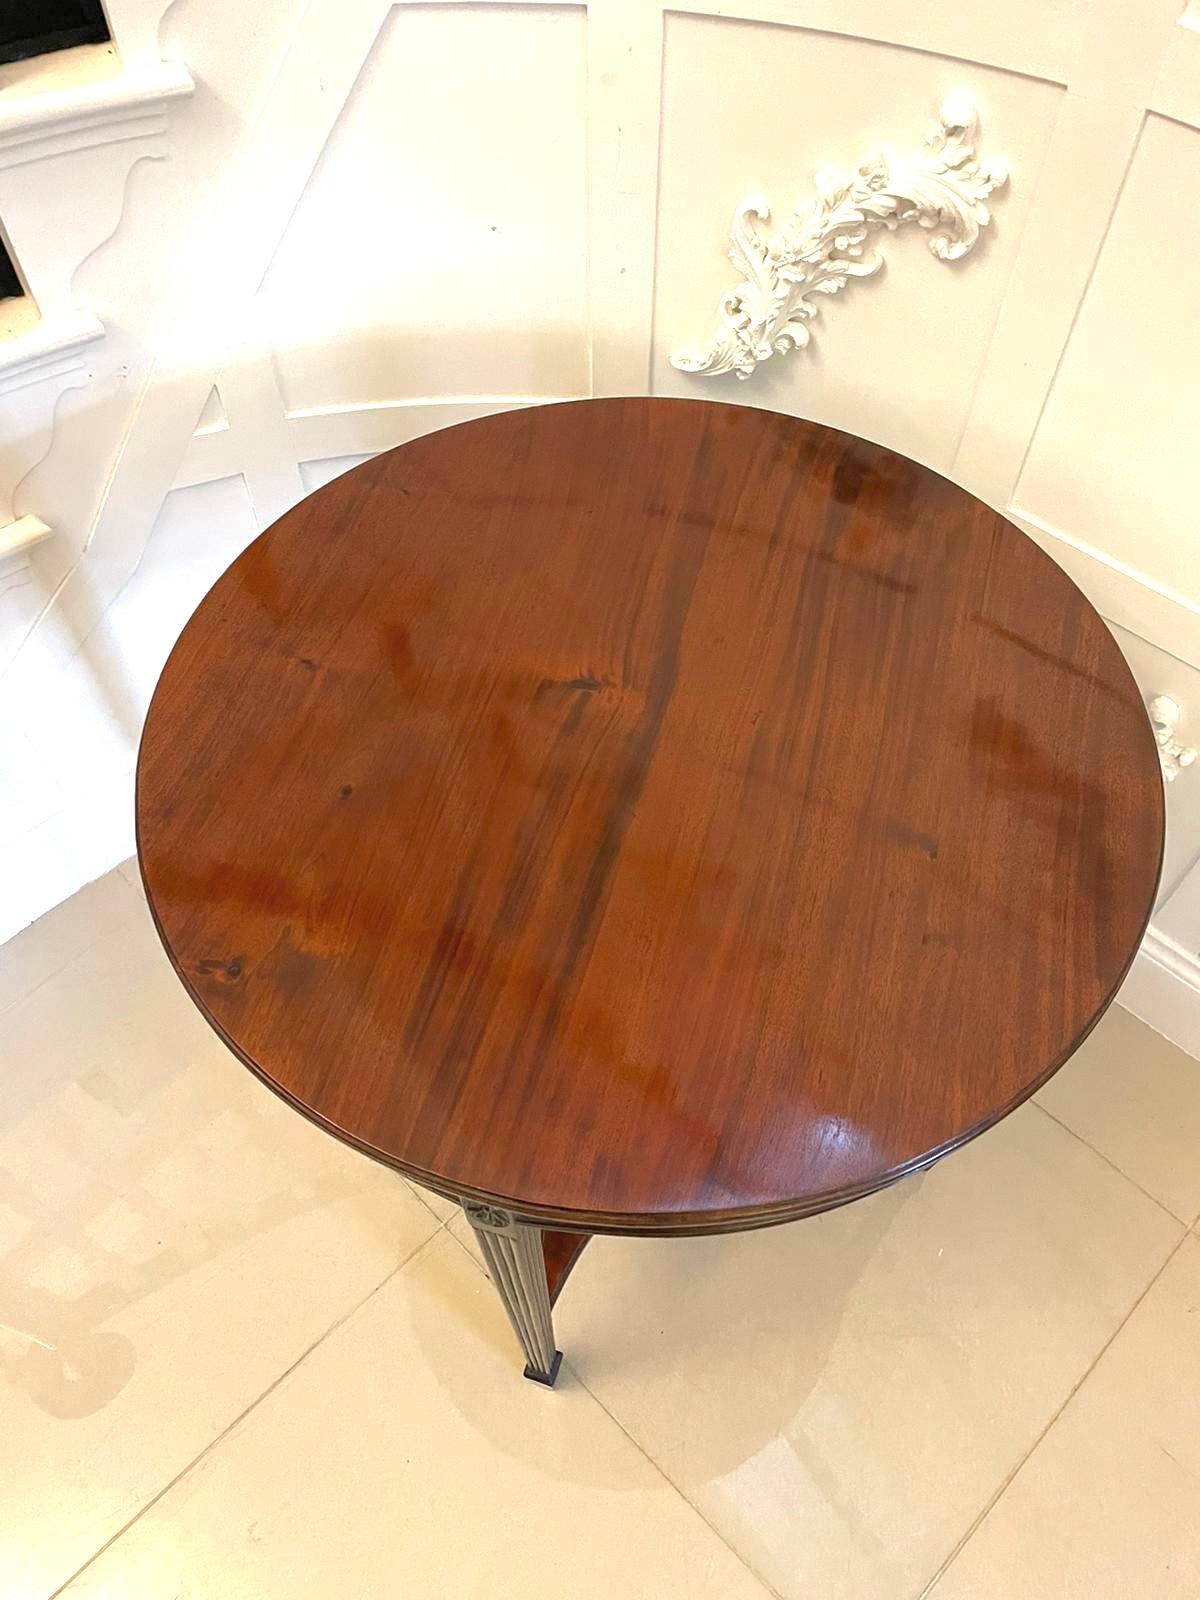 Antique Edwardian quality figured mahogany circular centre table having a quality circular figured mahogany top with a moulded edge, carved and reeded frieze standing on square tapering carved and reeded mahogany legs with spade feet and united by a